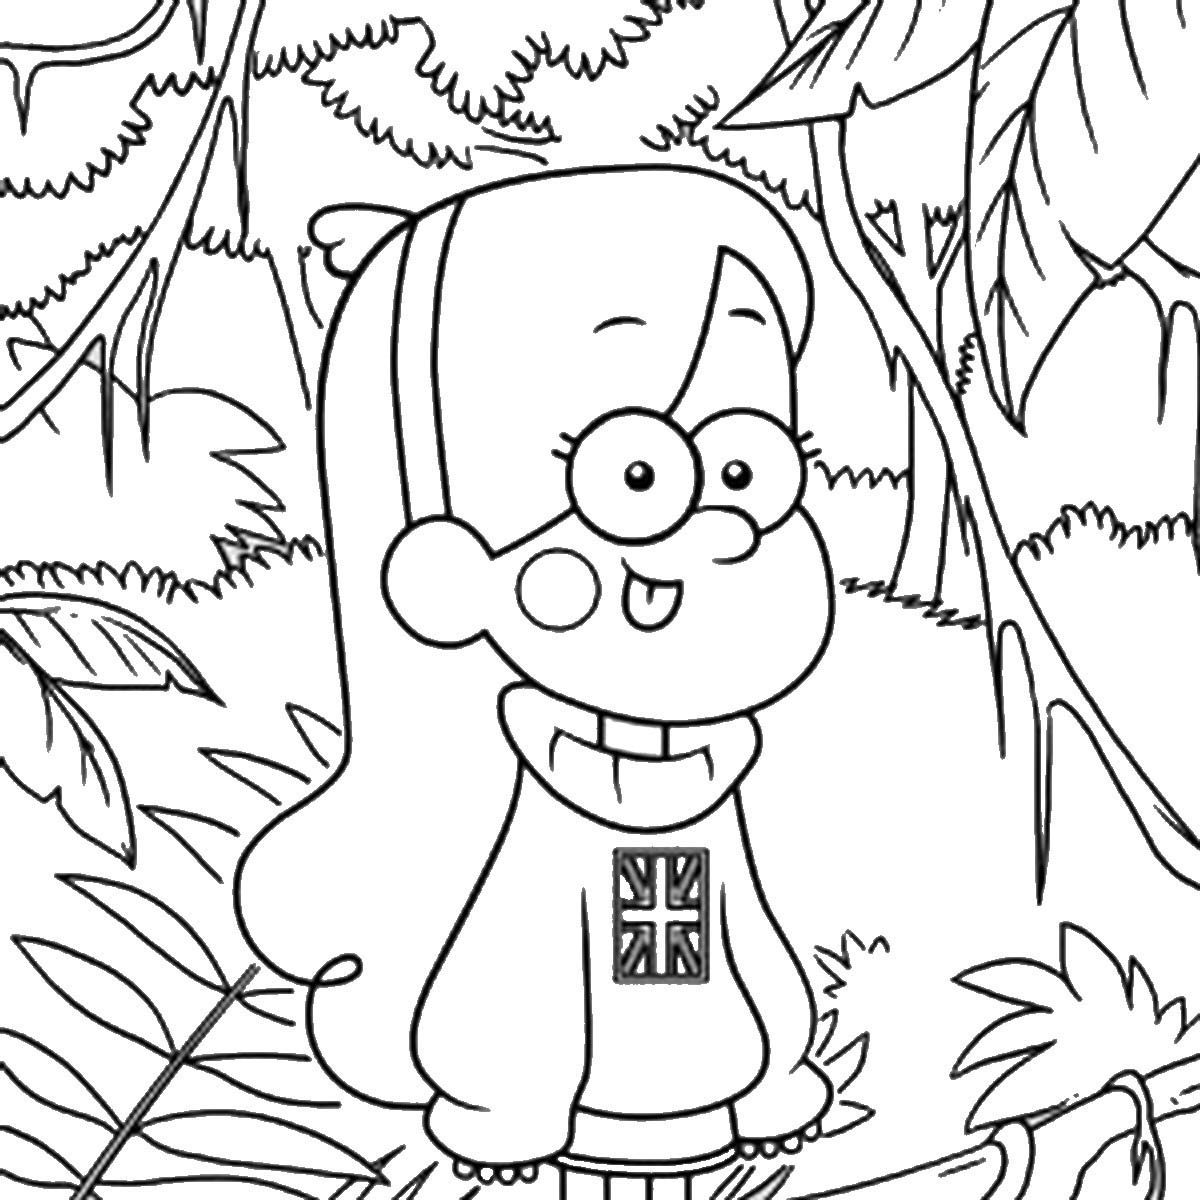 Free Gravity Falls Coloring Pages Mabel in the Woods printable